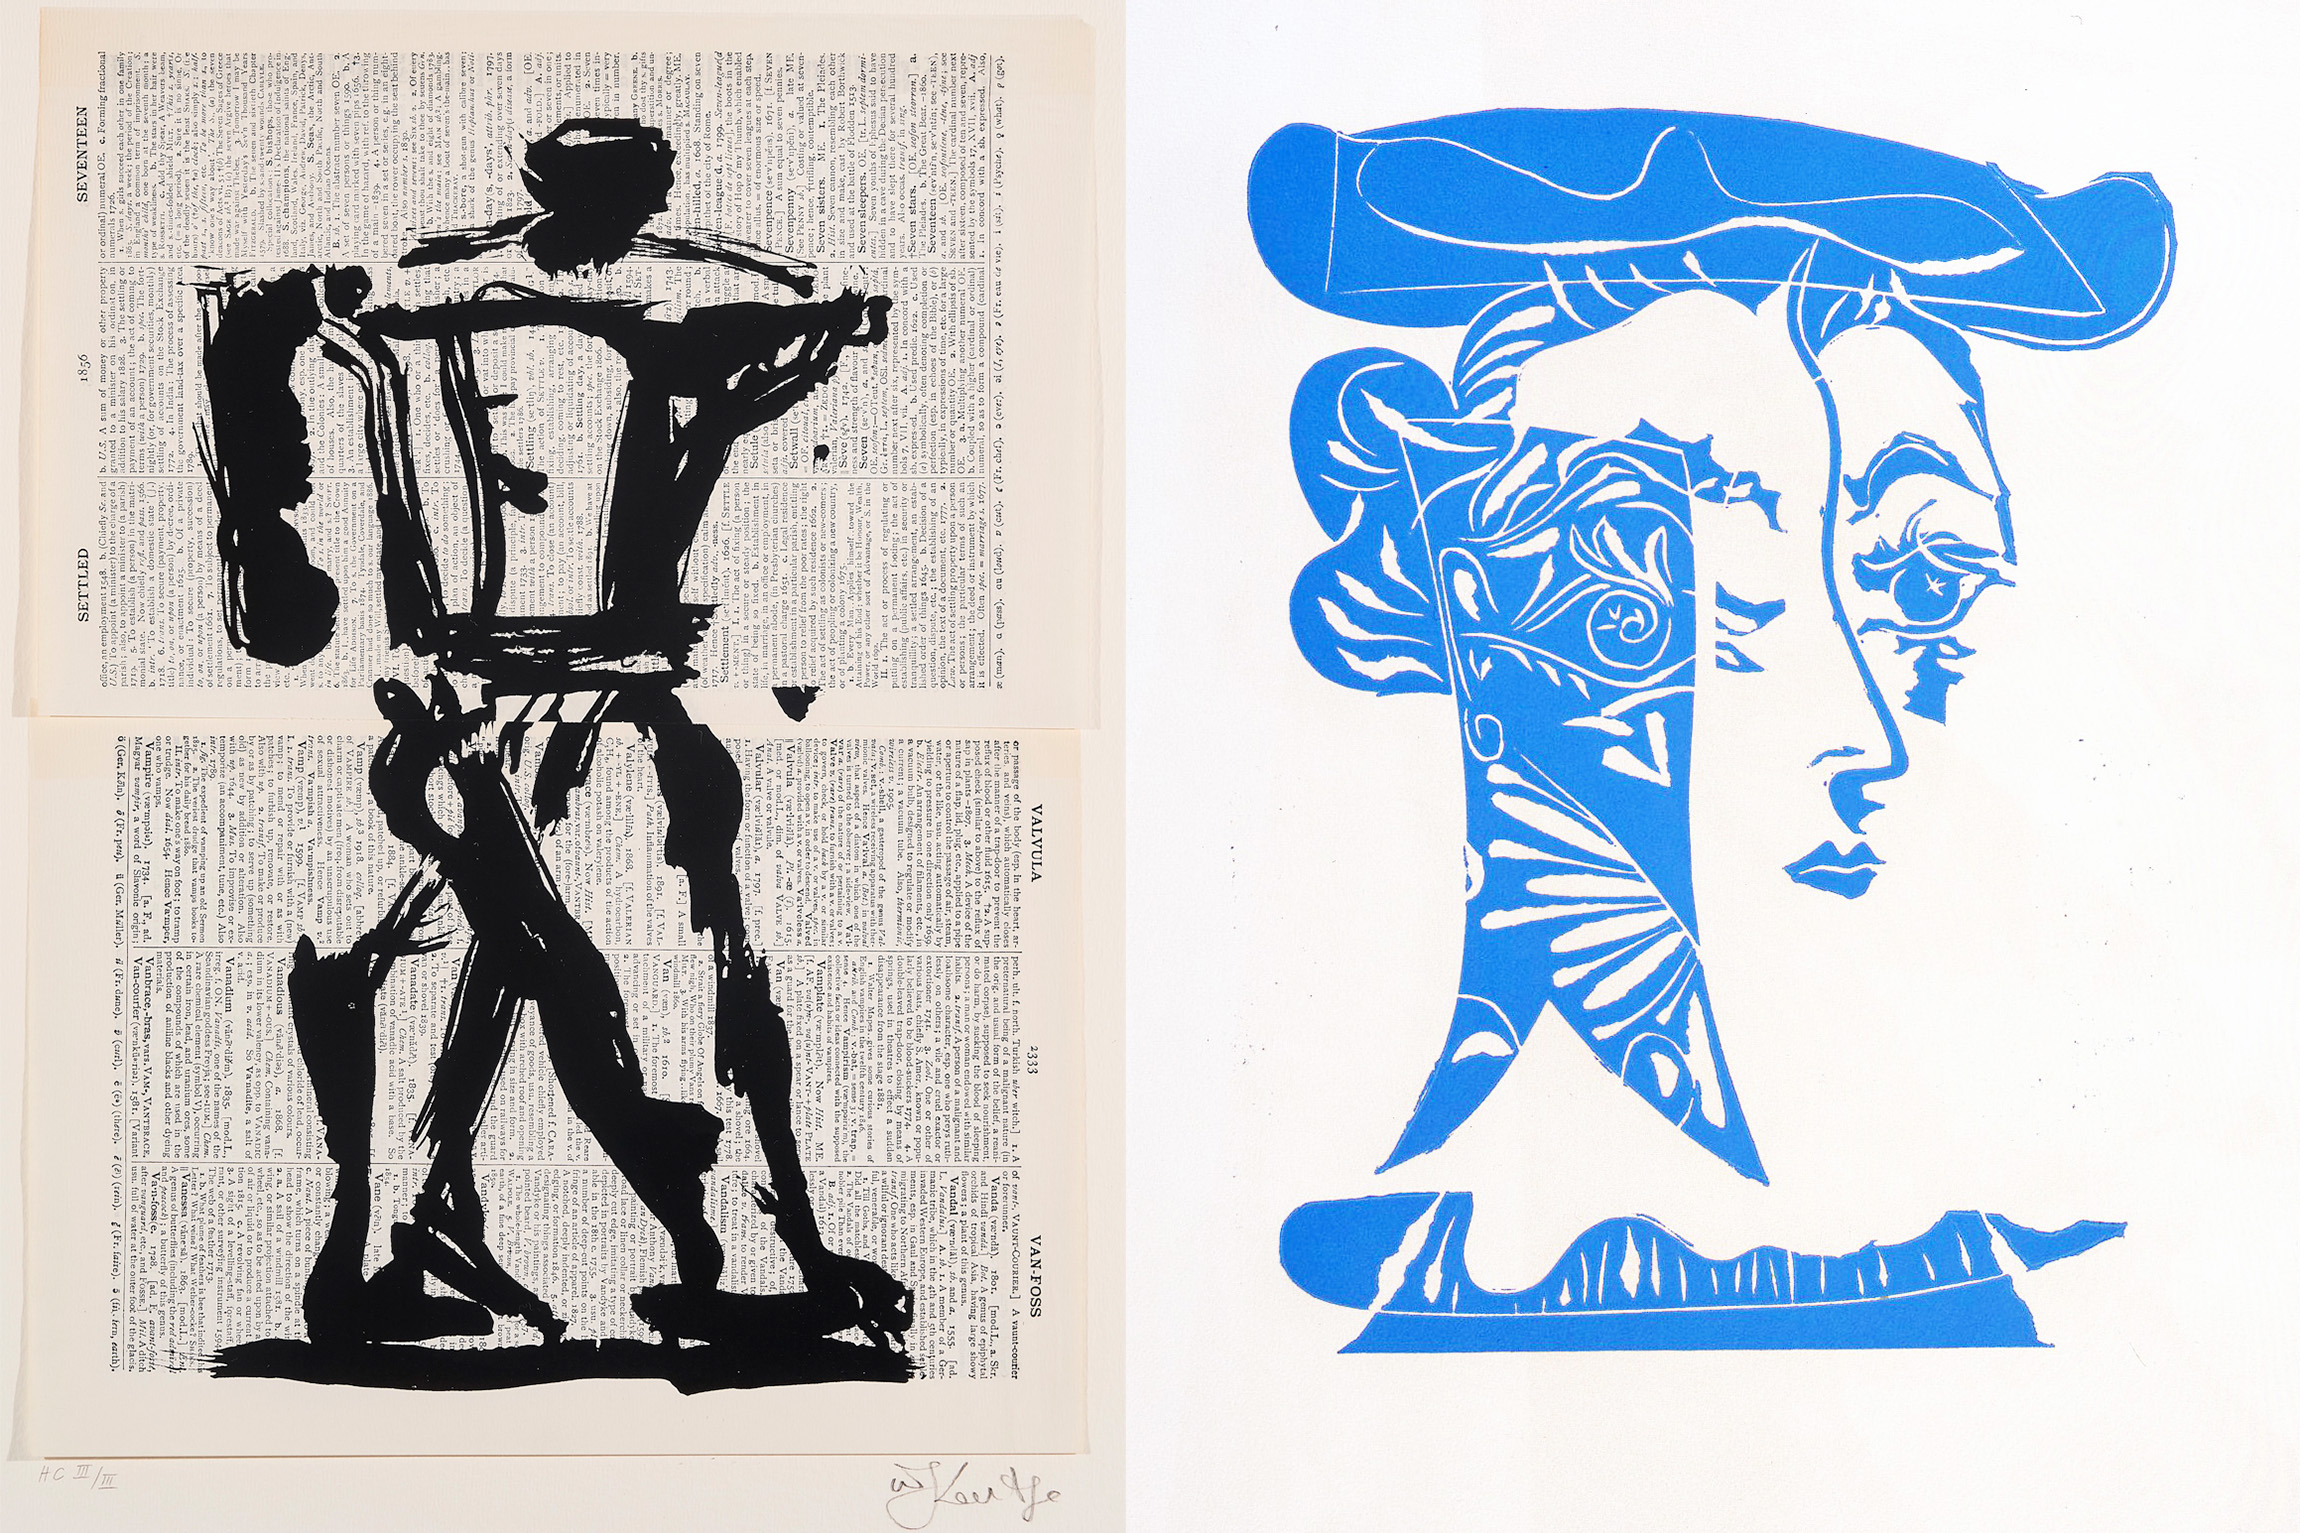 Two figurative prints are shown side by side, one by William Kentridge, the other by Pablo Picasso.